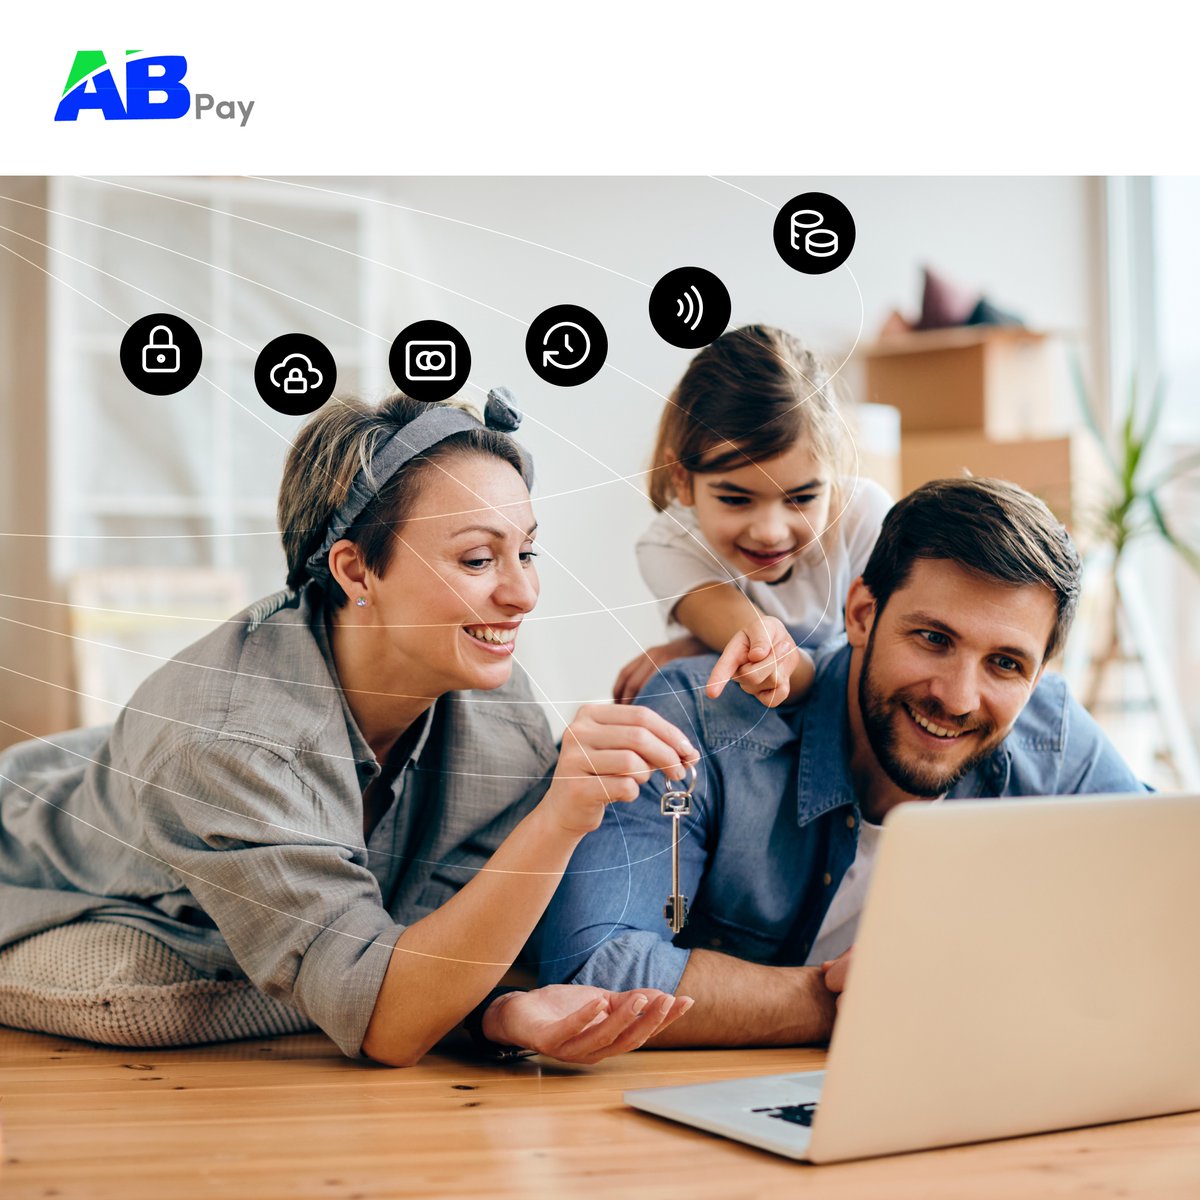 Our innovative technology and extensive know-how guarantee fast service, a smooth customer experience and less time spent in lines. 

#ABPAY #PCI #EMV #tokenization #encryption #SecureTransactions #FastPayments #PaymentSolutions #Securepayments #DataProtection